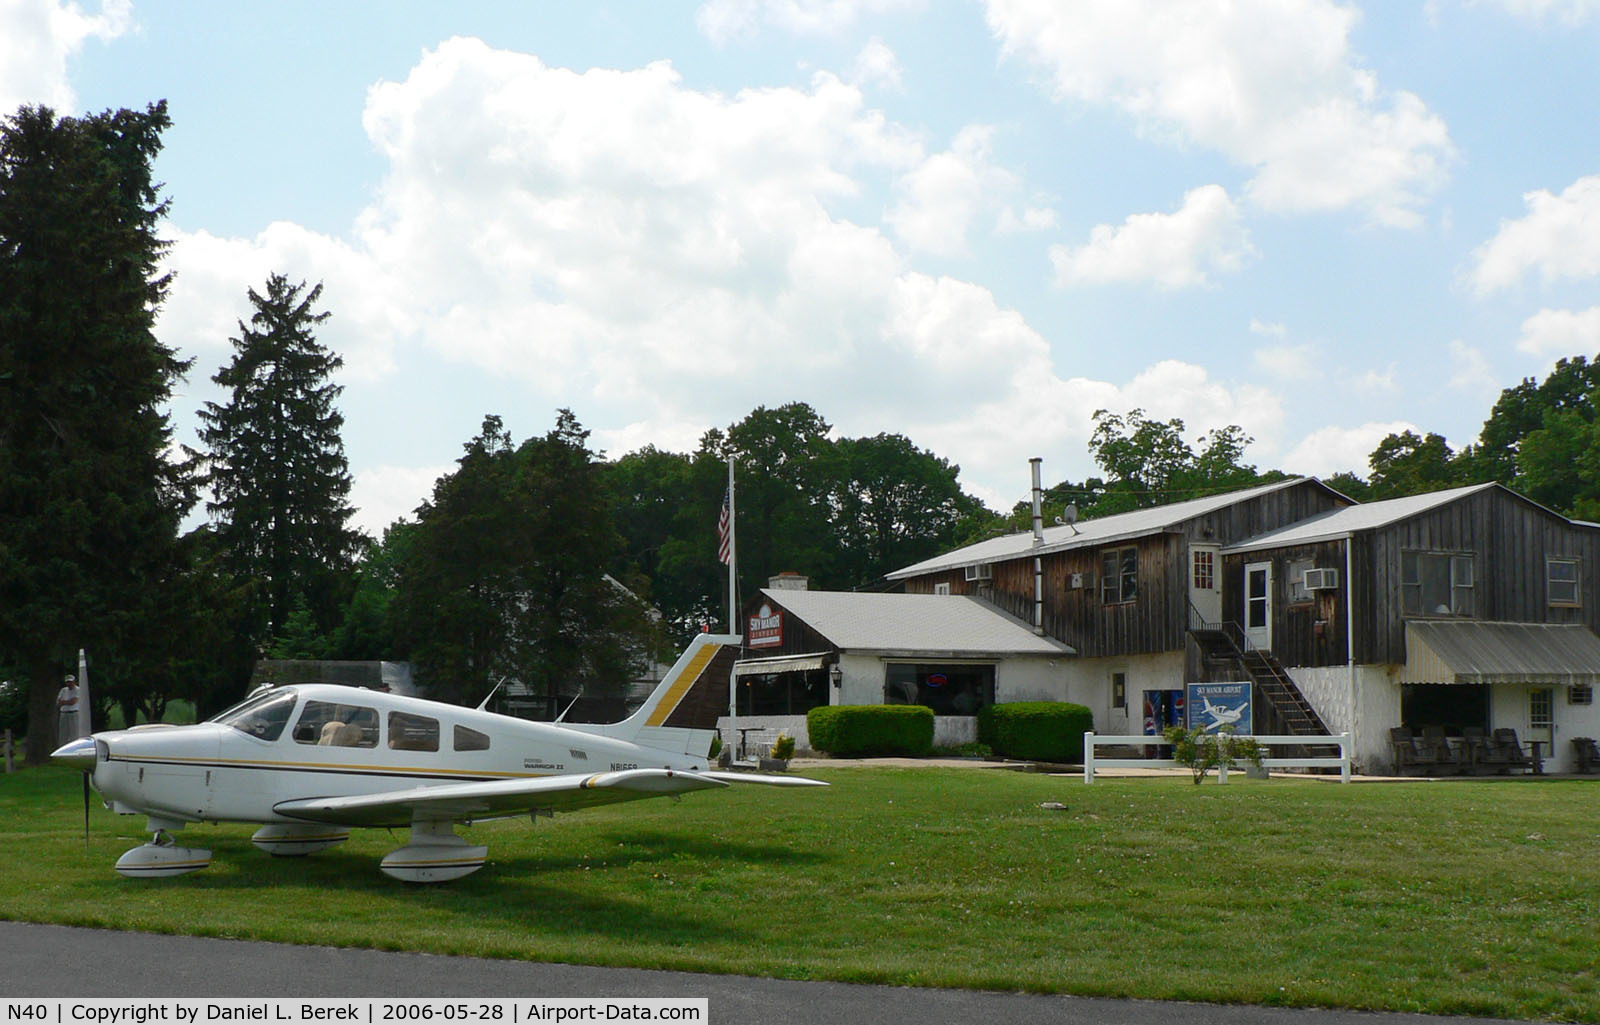 Sky Manor Airport (N40) - Sky Manor Airport is one of two serving Pittstown, NJ, in the rolling hills of Hunterdon County.